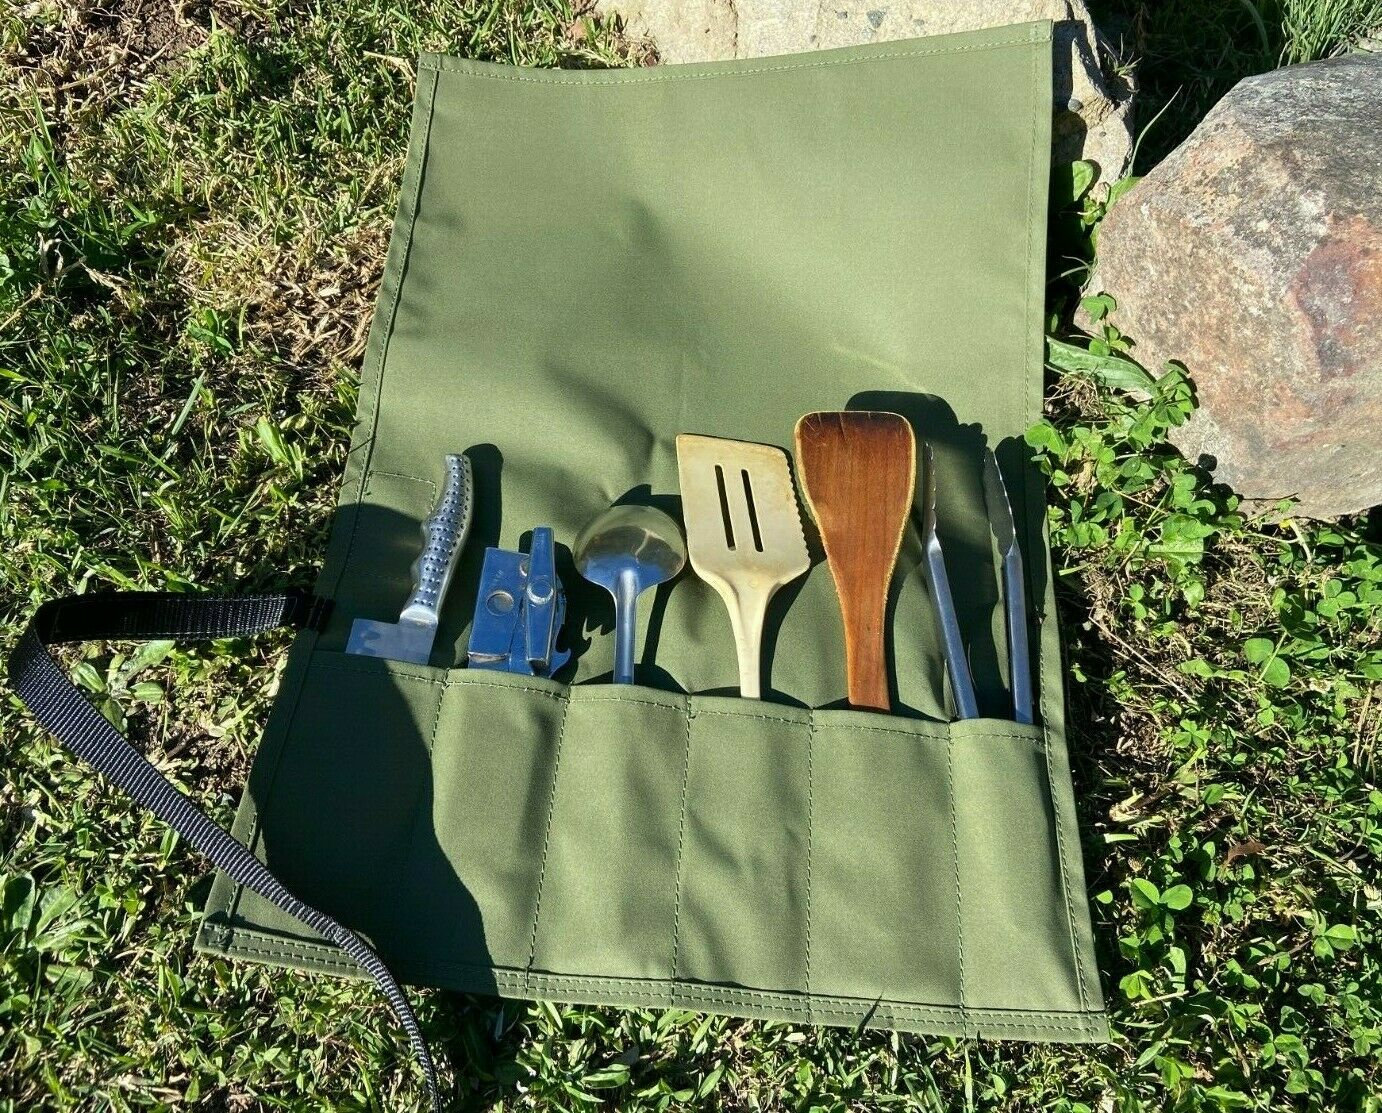 Camping Silverware Reusable Utensils Set with Case - SPCF019 - IdeaStage  Promotional Products